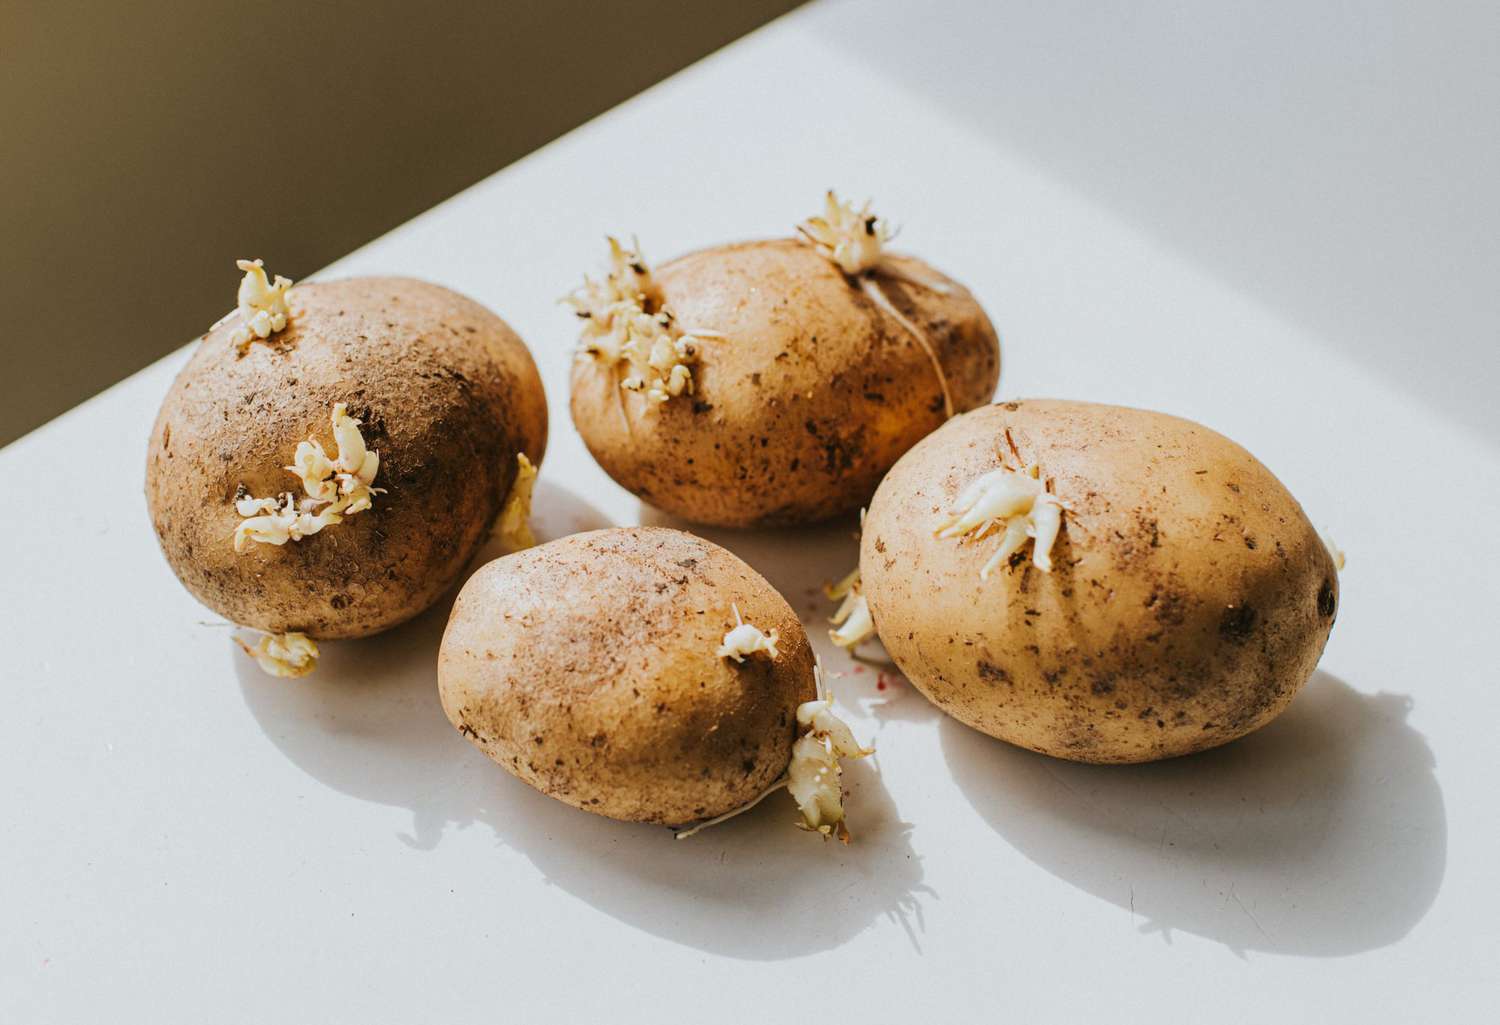 How To Plant Sprouted Potatoes